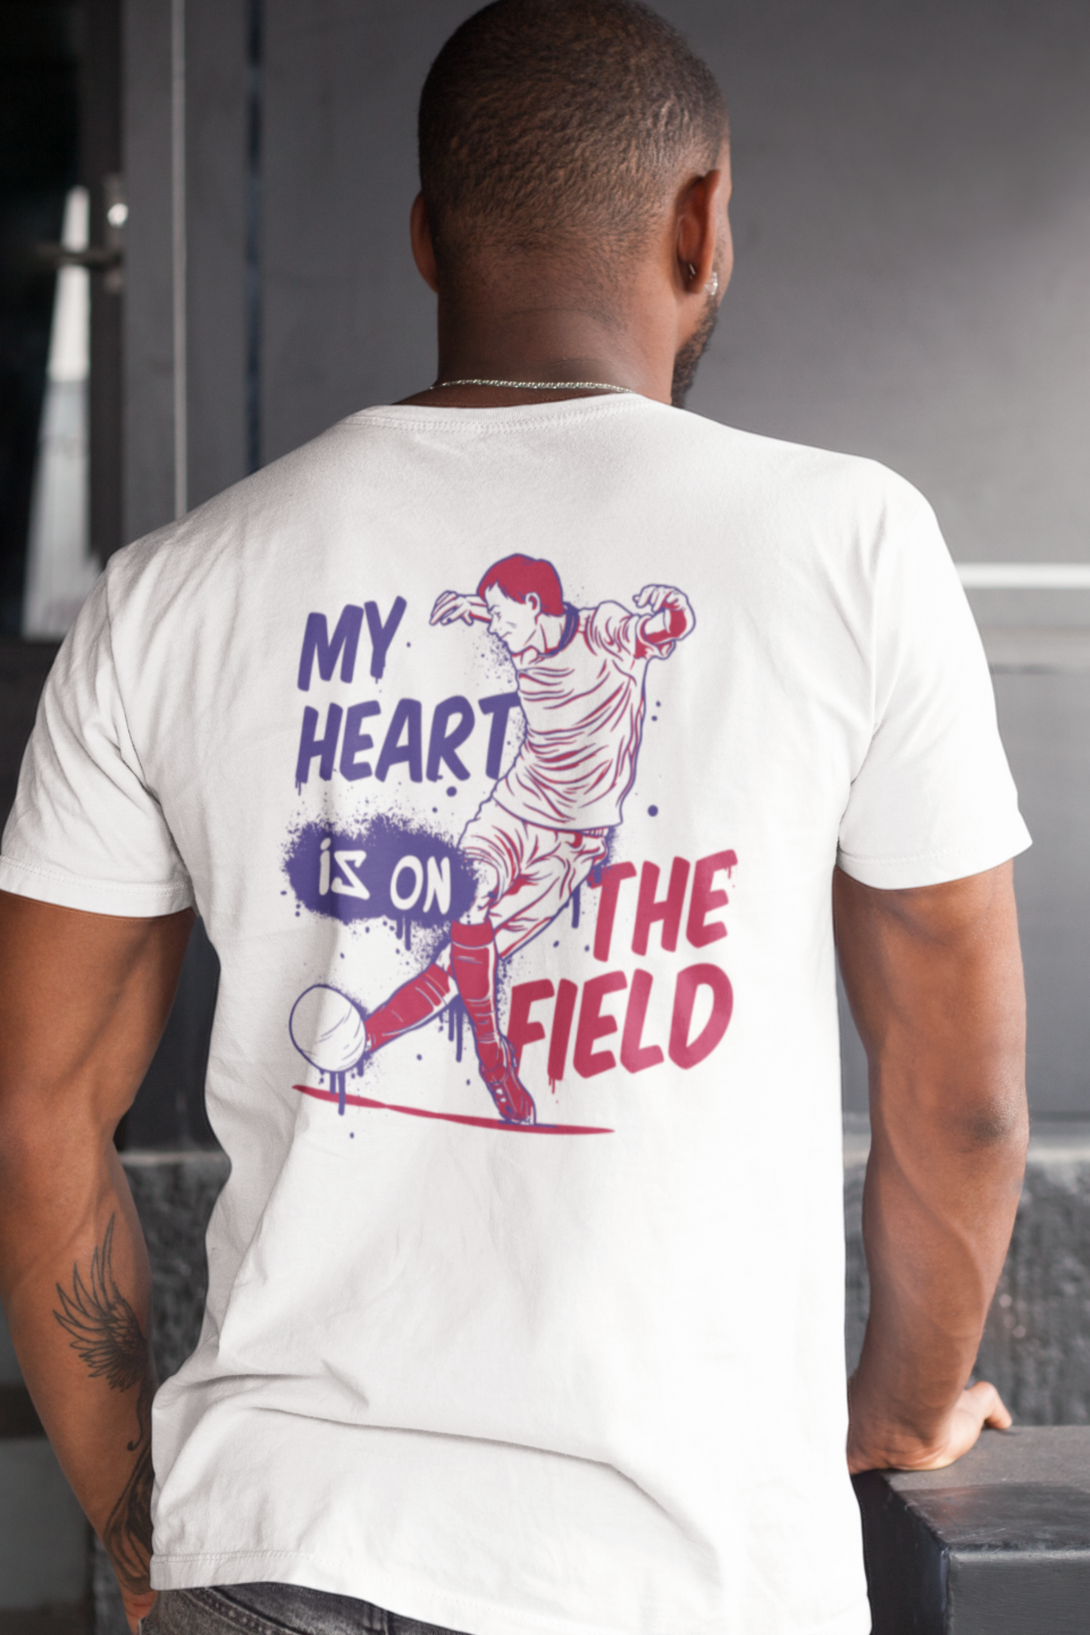 My Heart Is On The Field Printed T-Shirt For Men - WowWaves - 2